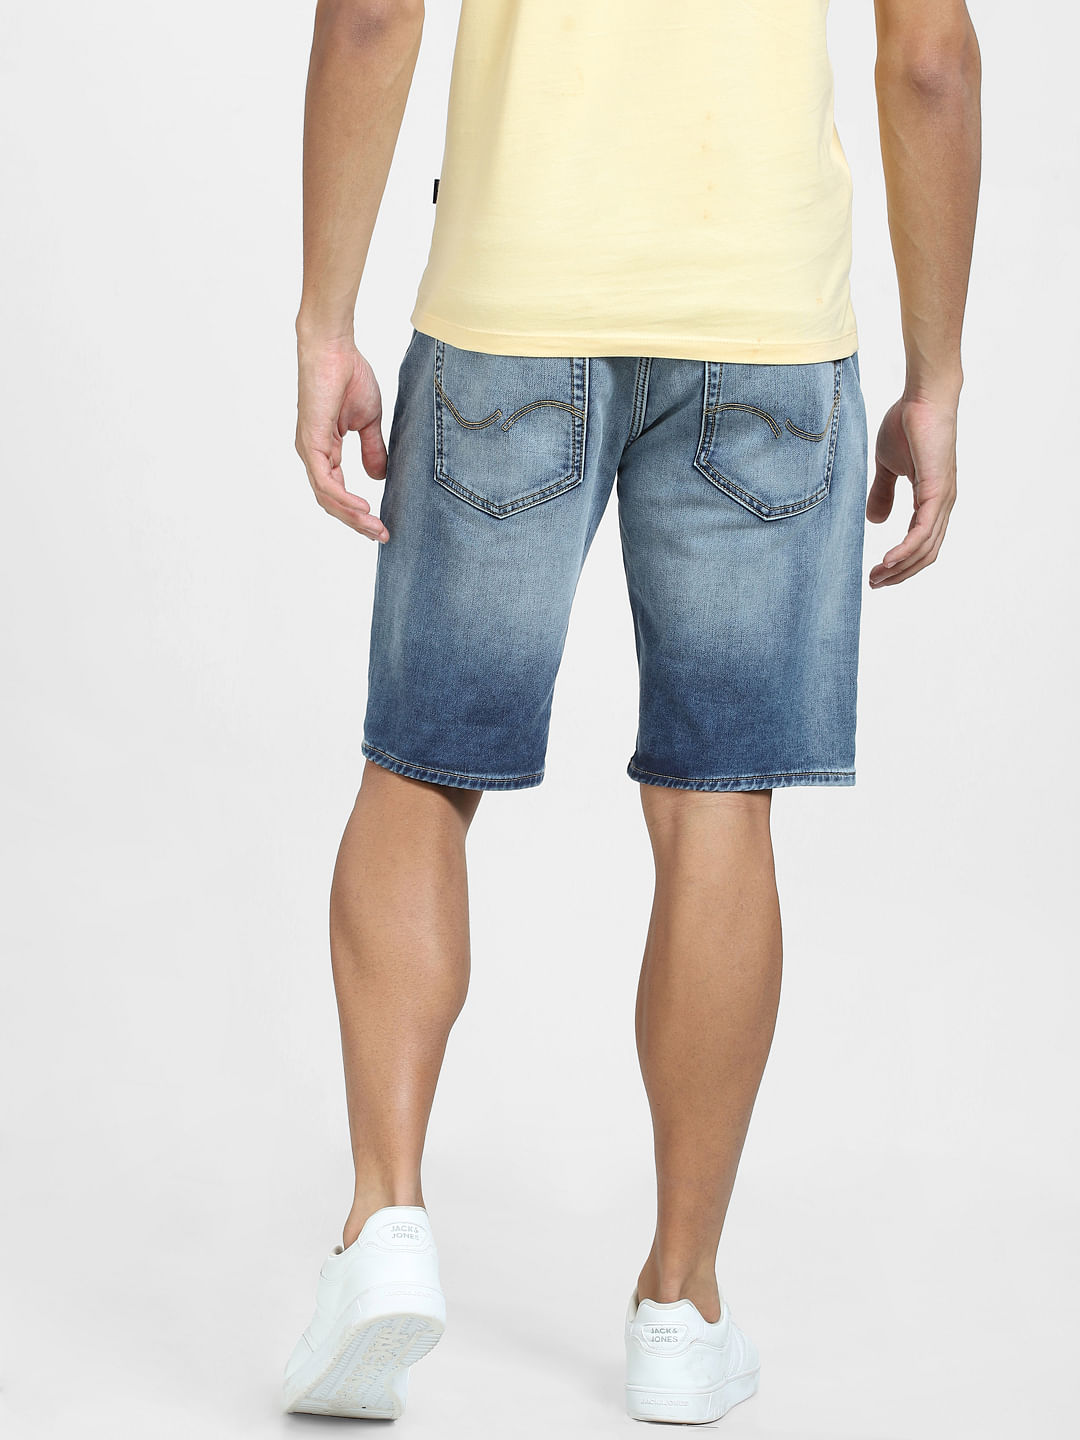 The 15 Best Denim Shorts for Men to Shop in 2023